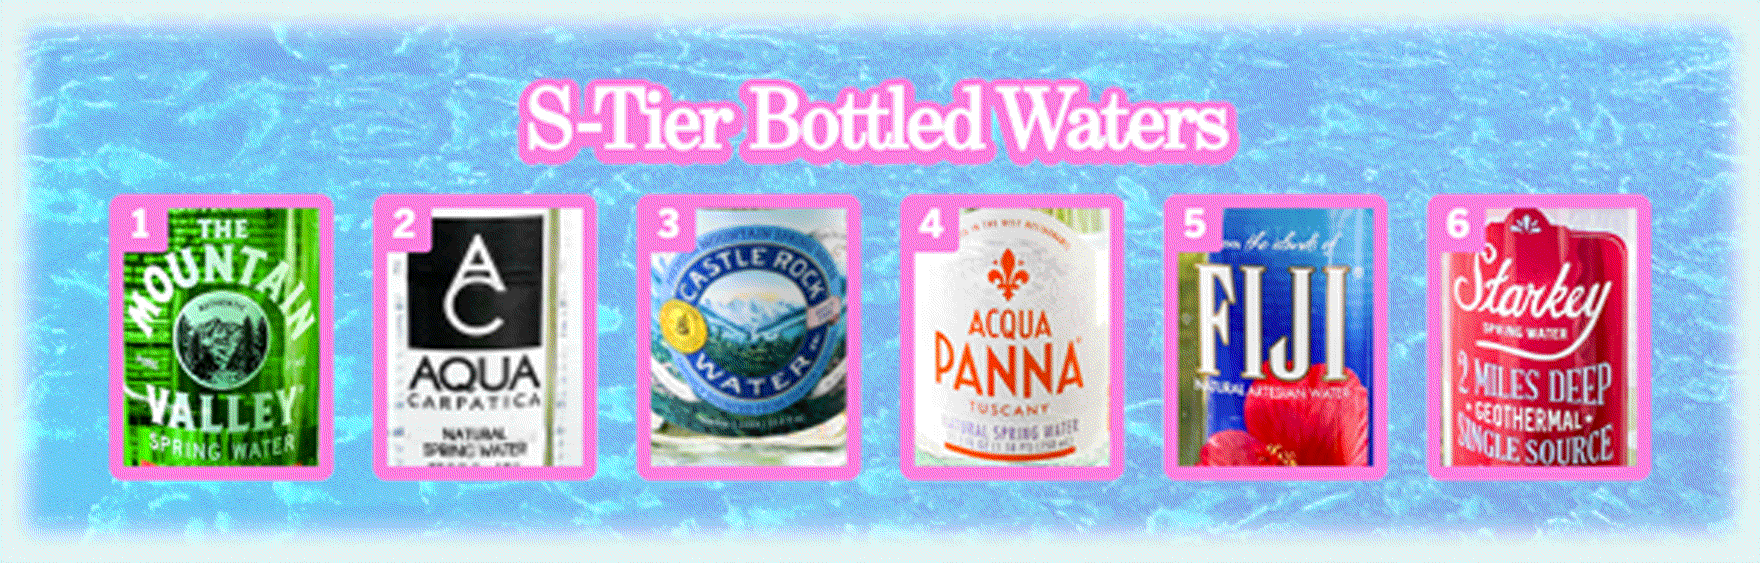 S-tier bottled waters 1 through 6